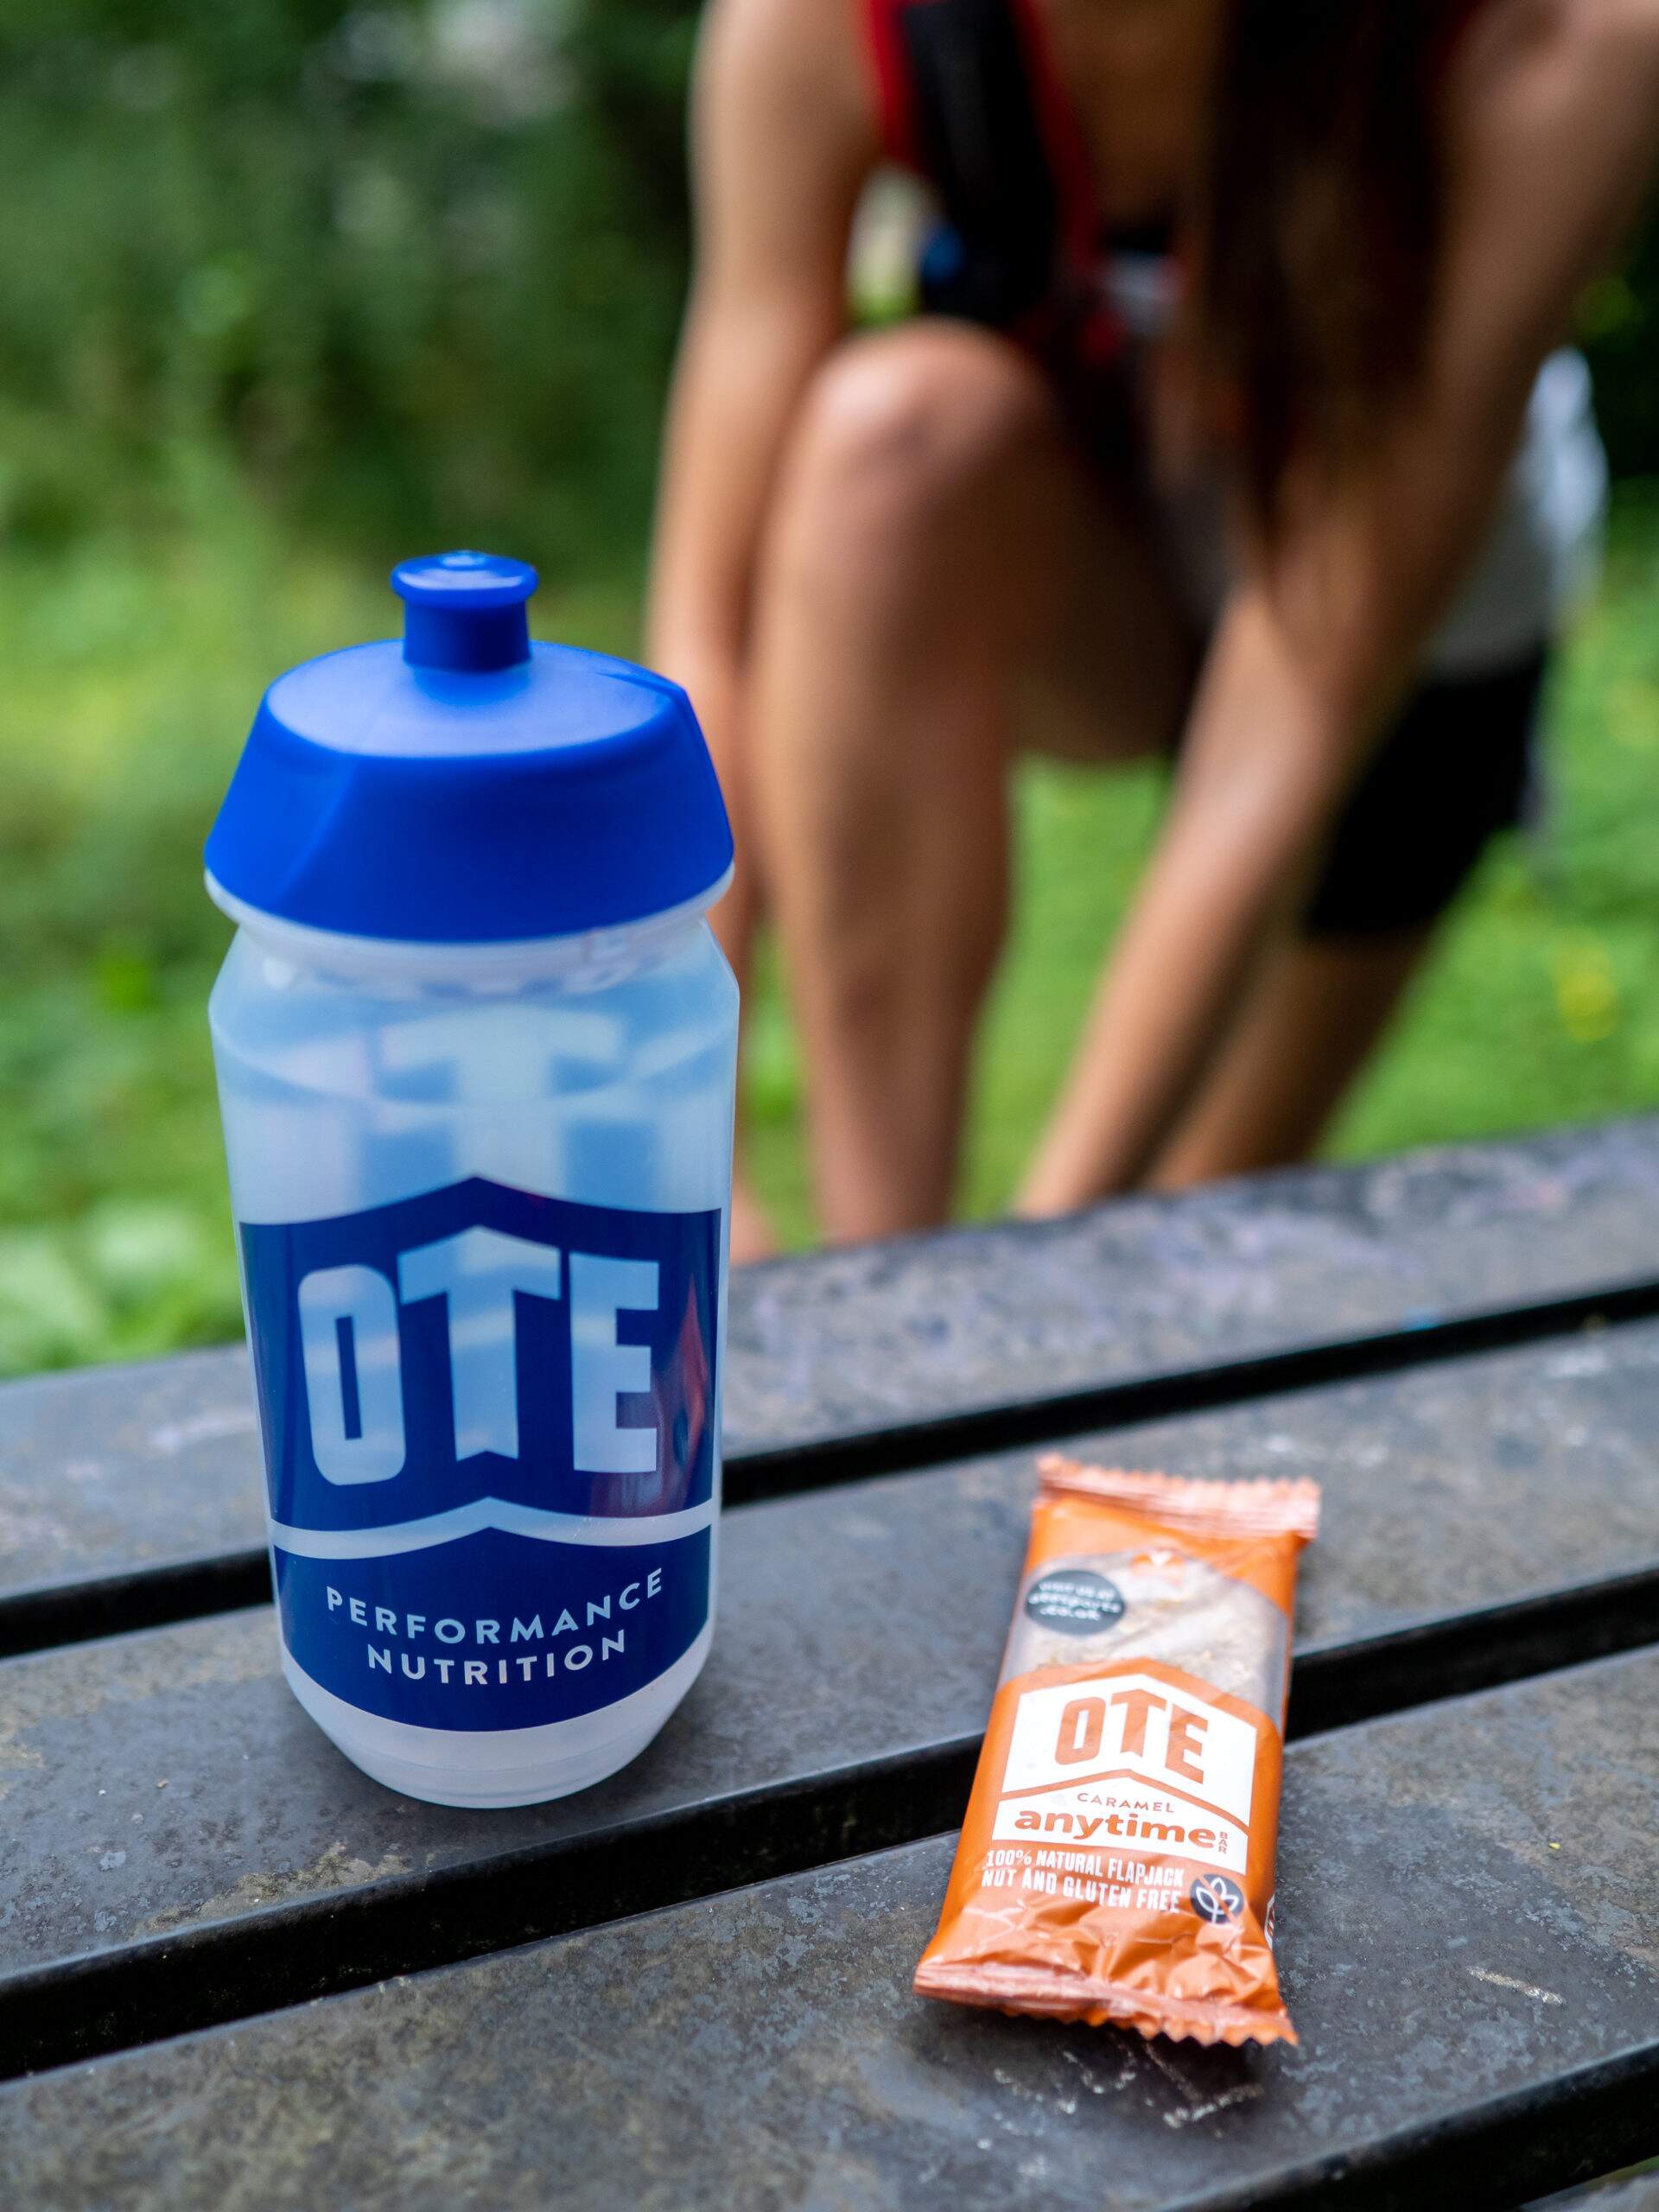 OTE Bottle and Anytime Bar